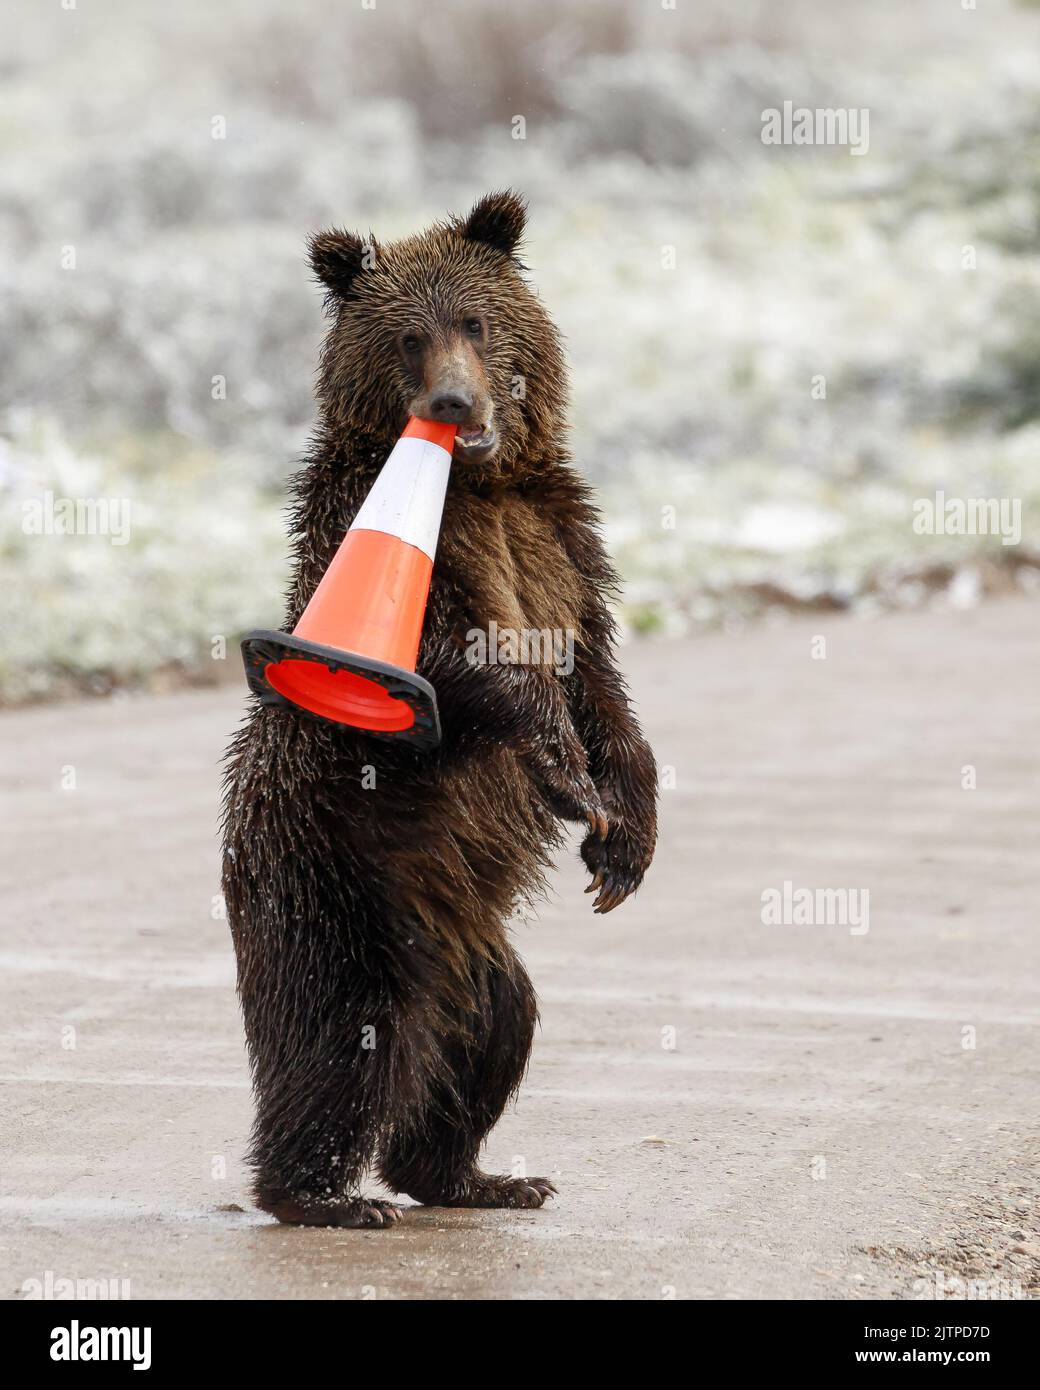 The bear cub stealing the cone. Wyoming, USA: LIKE A UK prankster student these comical images show a furry bear thief stealing road cones and causing Stock Photo